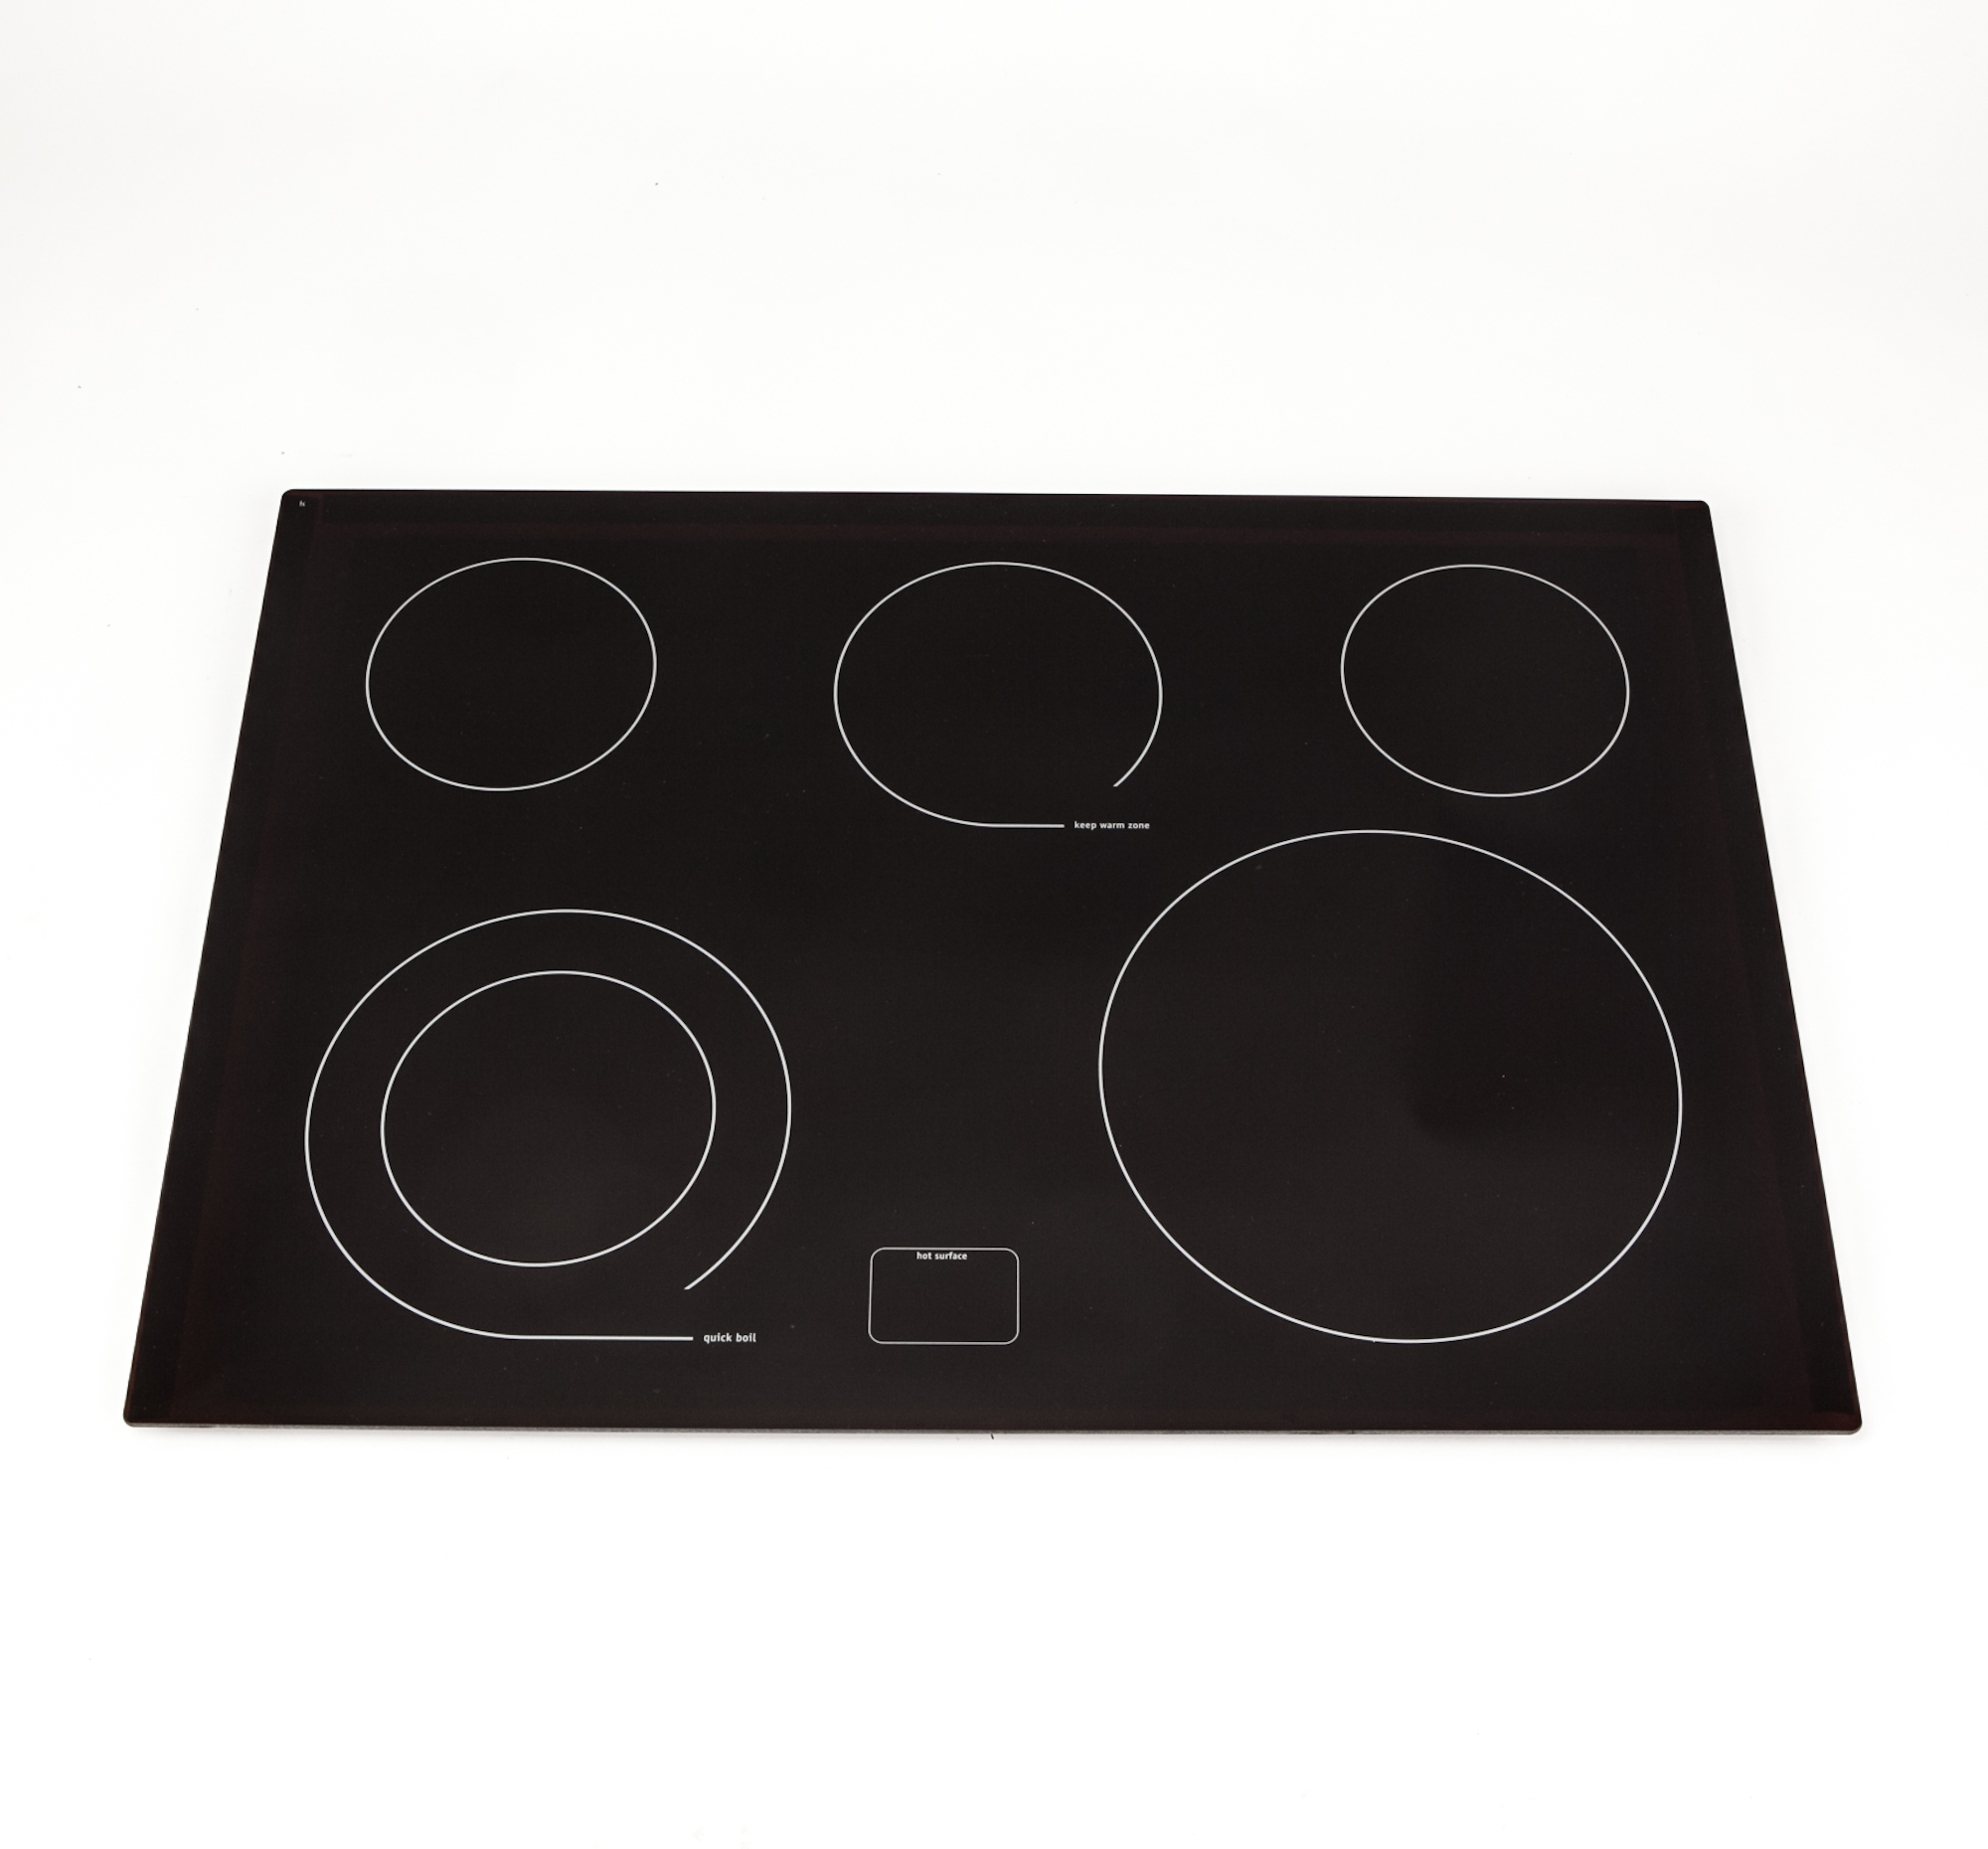 GE Cooktop - broken glass all other parts working